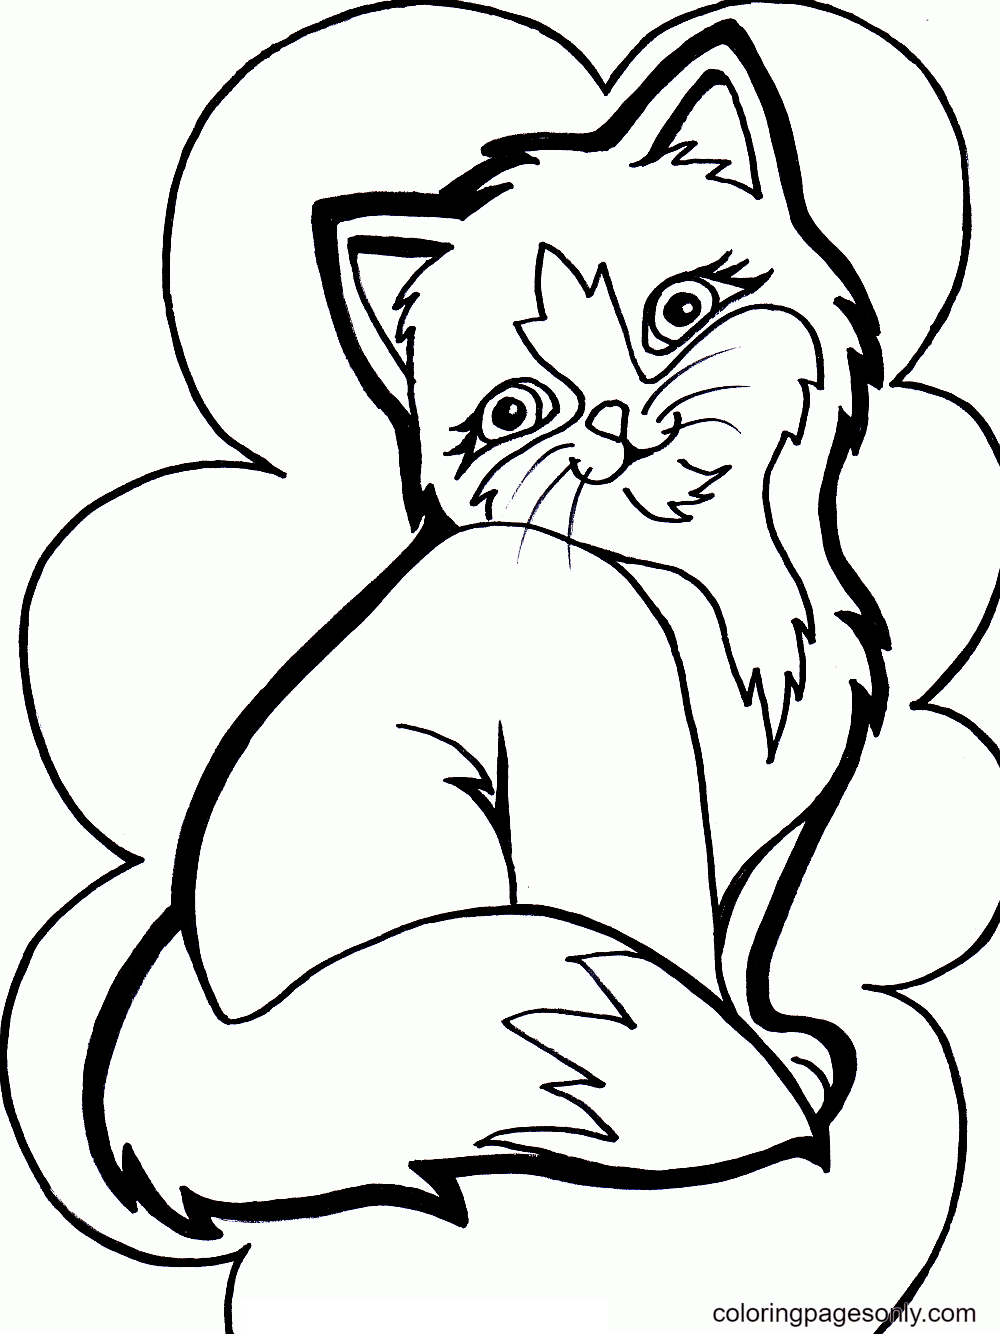 Kitten Have Amazing Fur Coloring Pages